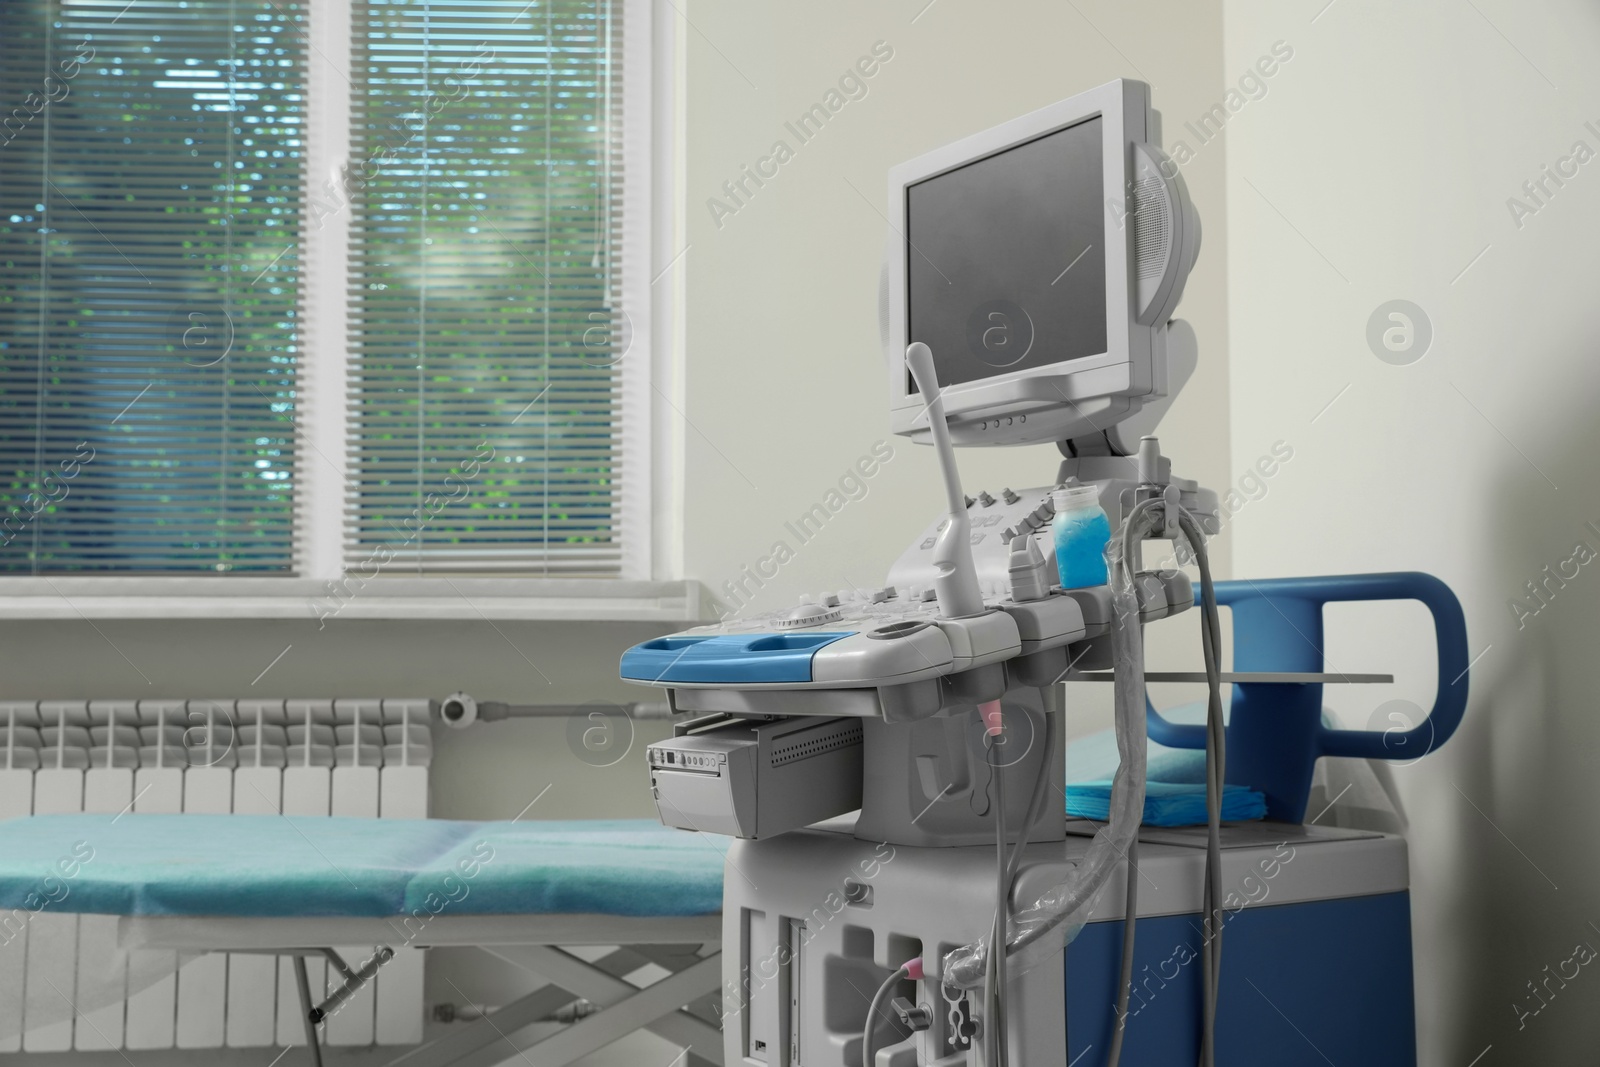 Photo of Ultrasound machine and examination table in hospital